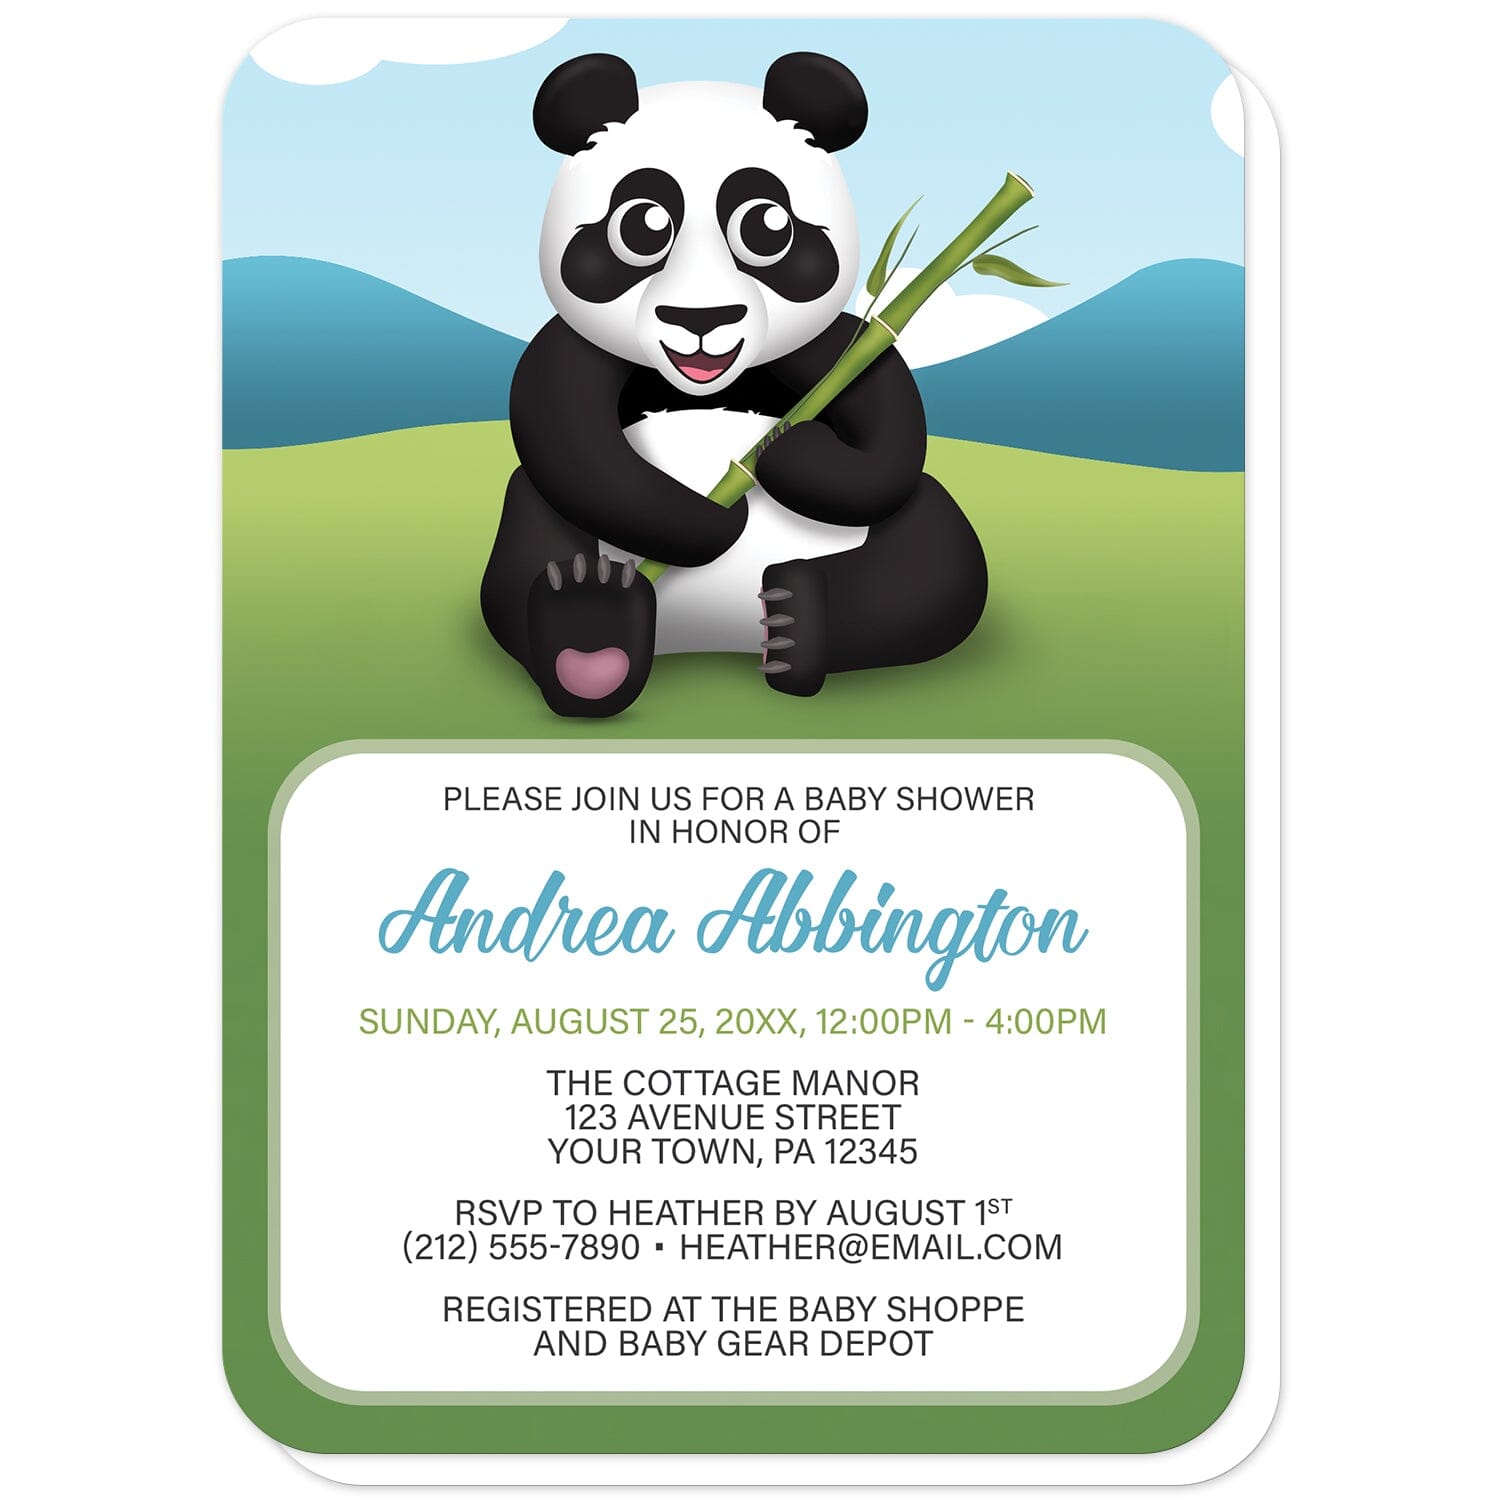 Cute Panda with Bamboo Baby Shower Invitations (with rounded corners) at Artistically Invited. Cute panda with bamboo baby shower invitations with a unique illustration of a happy and cute panda sitting in the grass holding bamboo with a simple Asian mountains background with a blue sky. Your personalized baby shower celebration details are custom printed in blue, green, and dark gray in a white rectangular area over the background design below the happy panda.